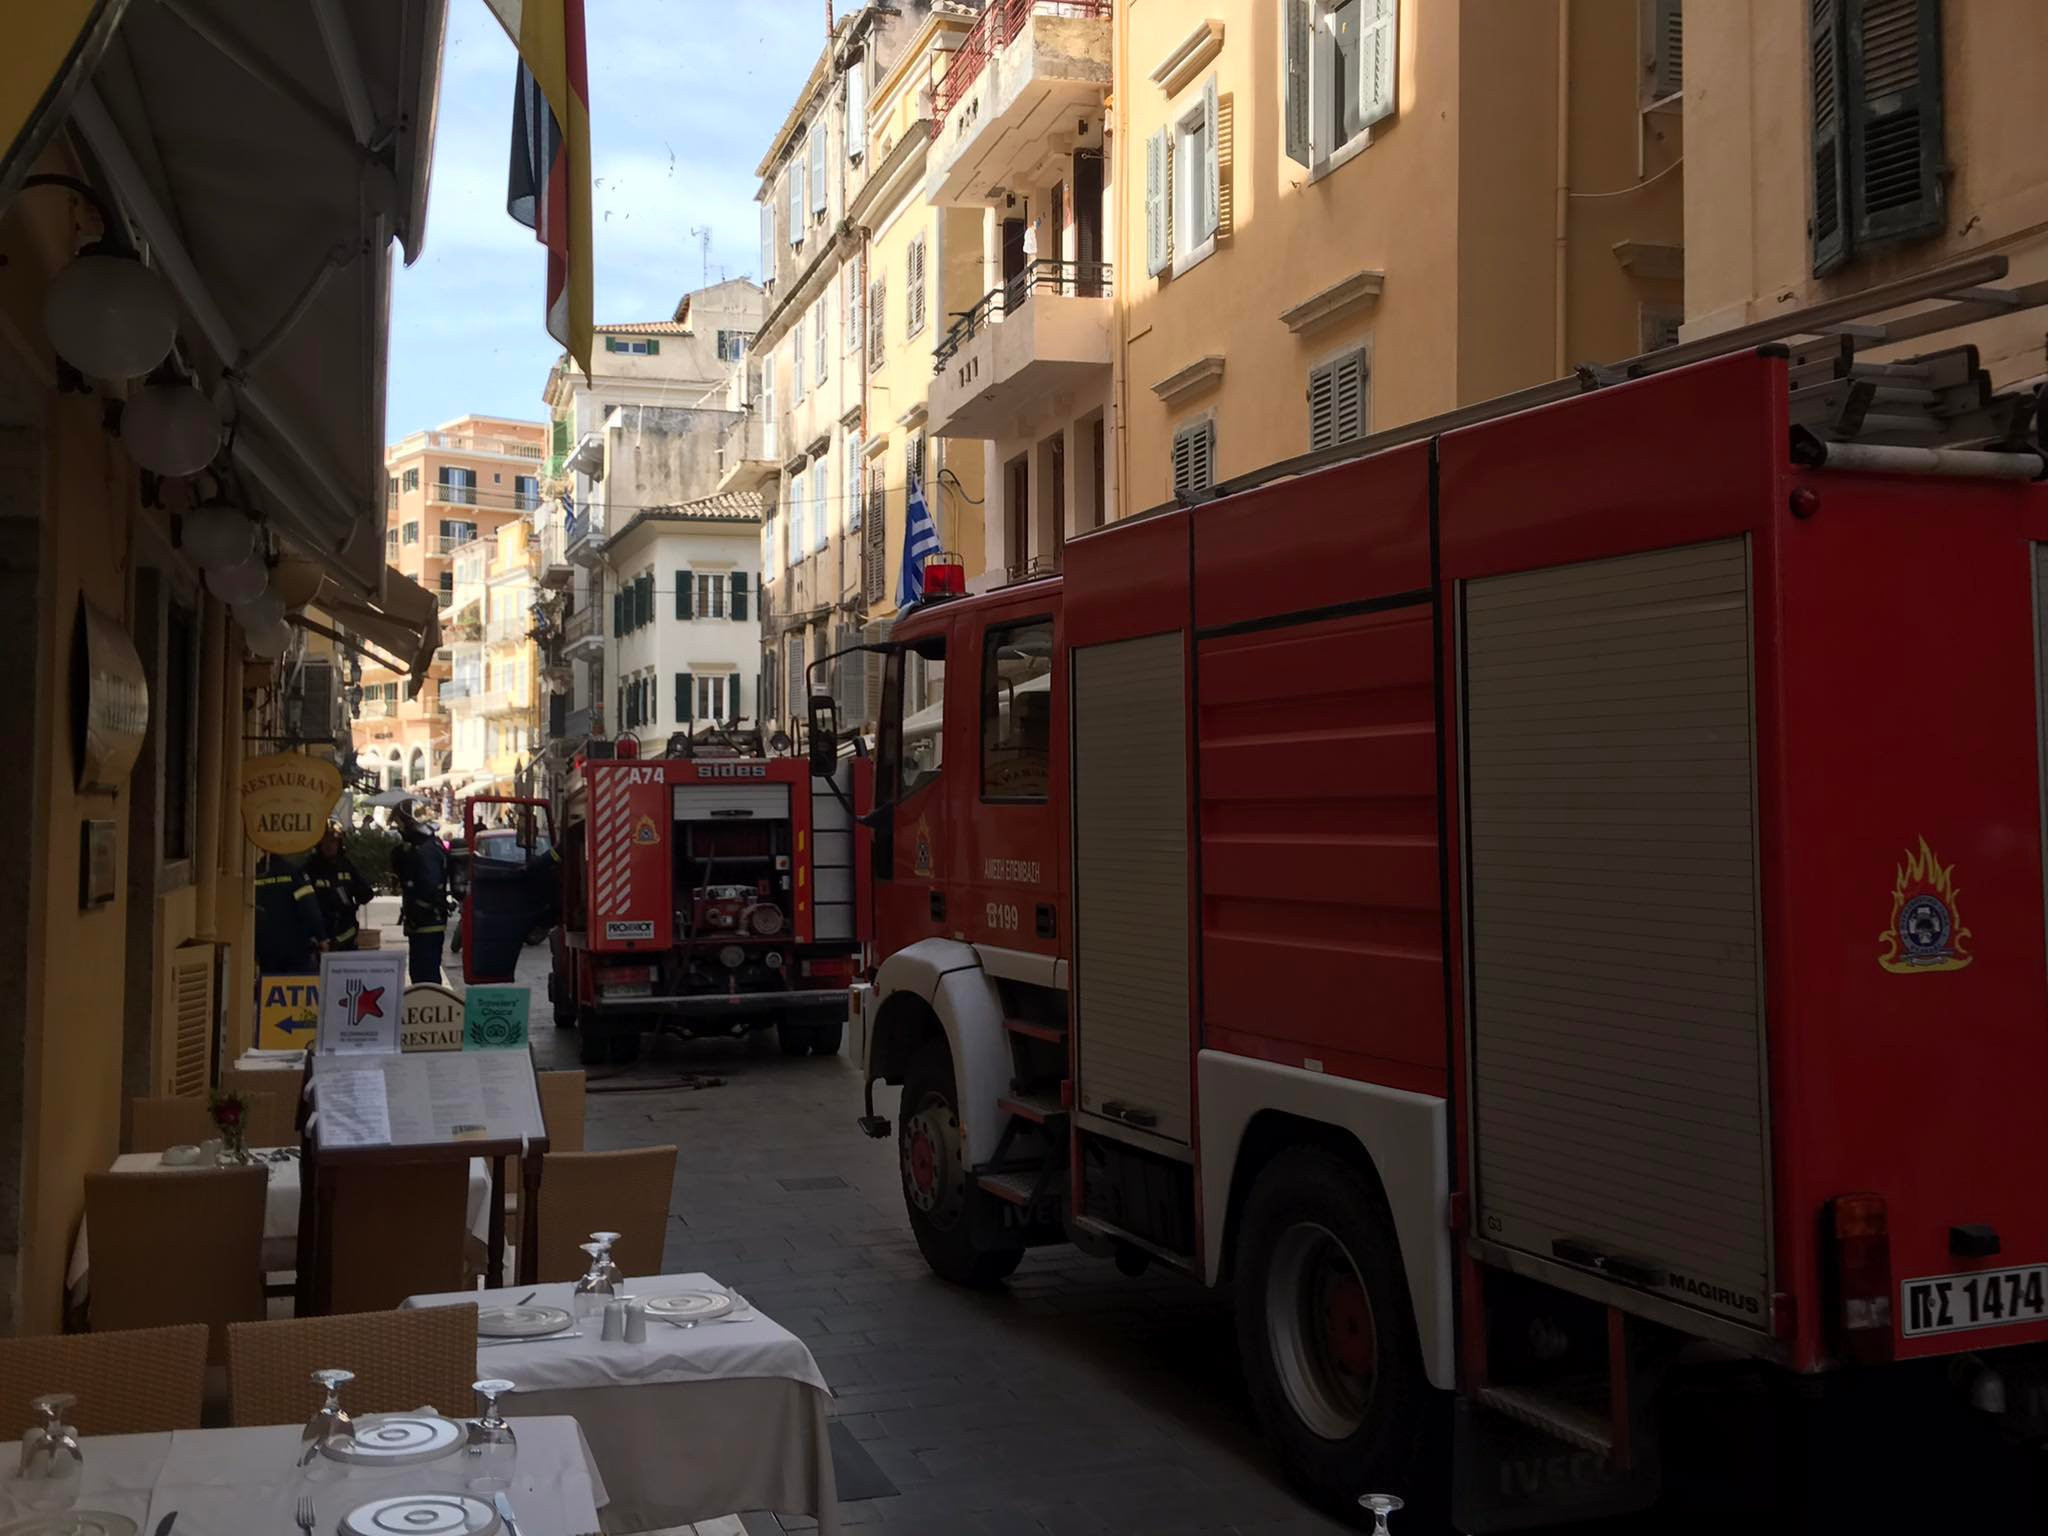 Fire in Capodistrias St. shop due to electrical short circuit